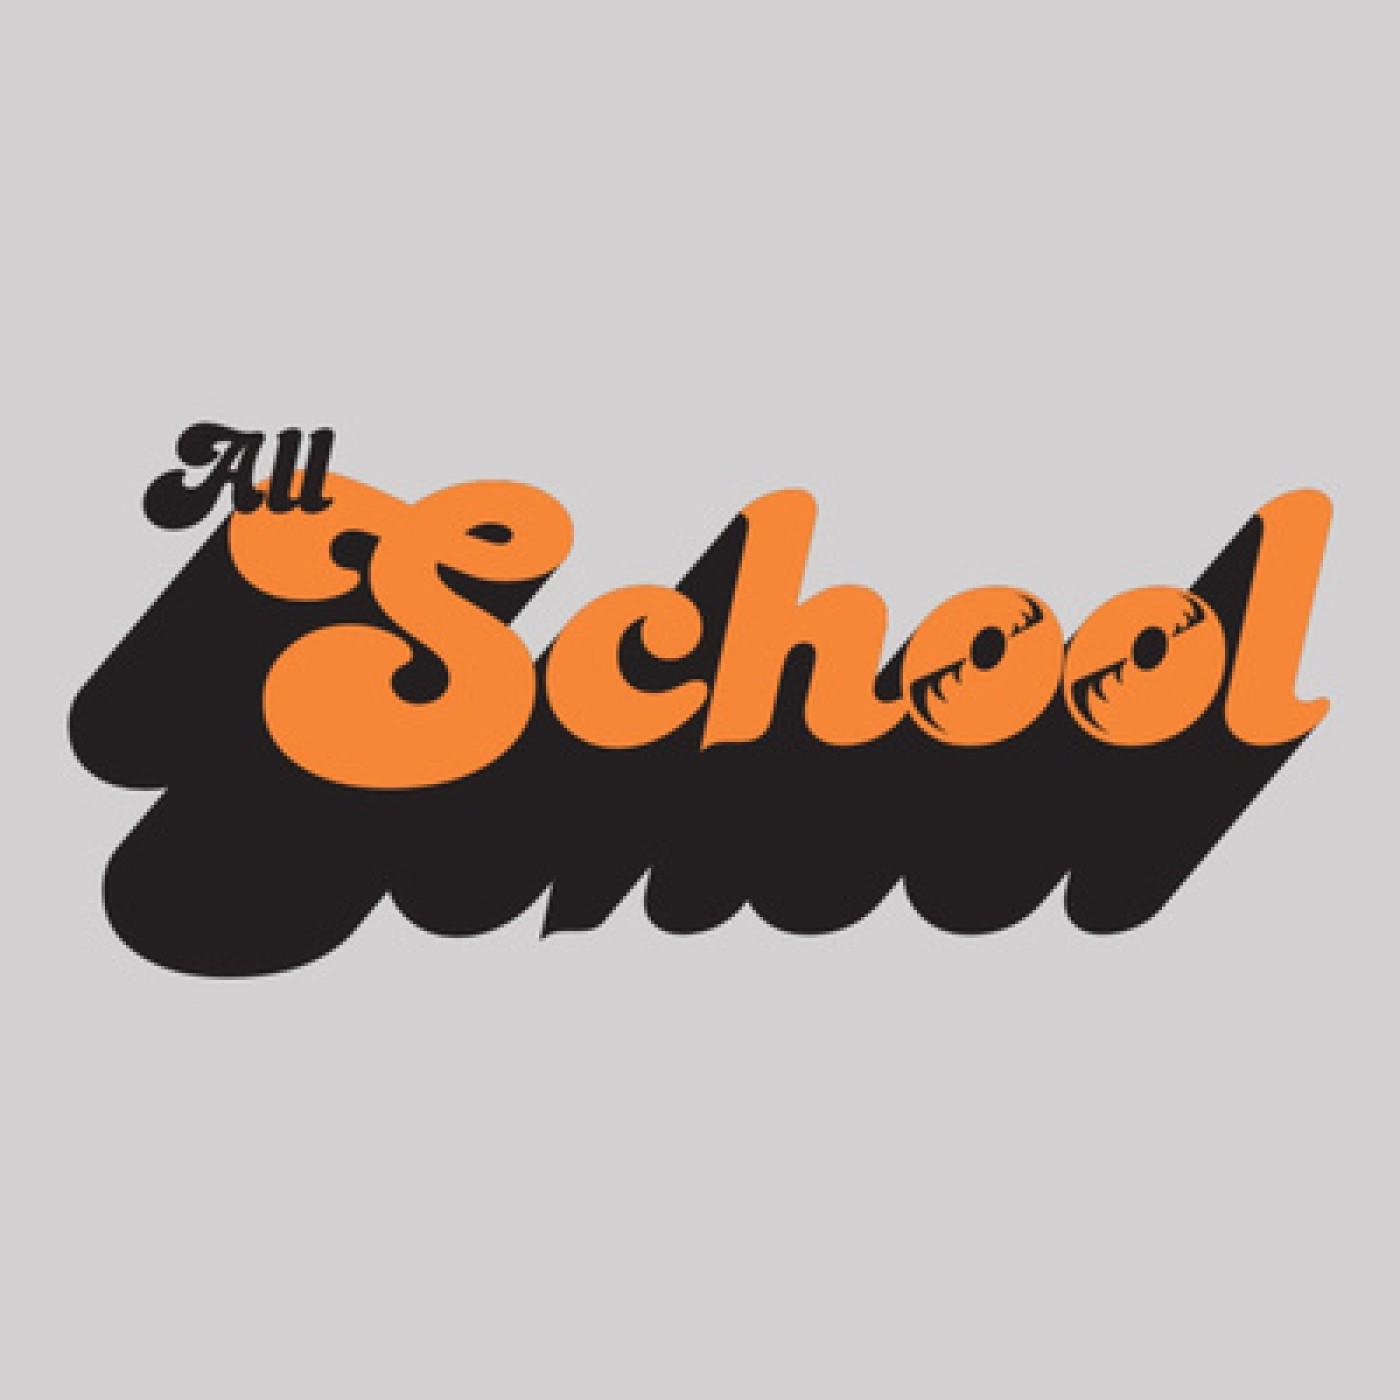 All School #9 feat. Captains of the Imagination